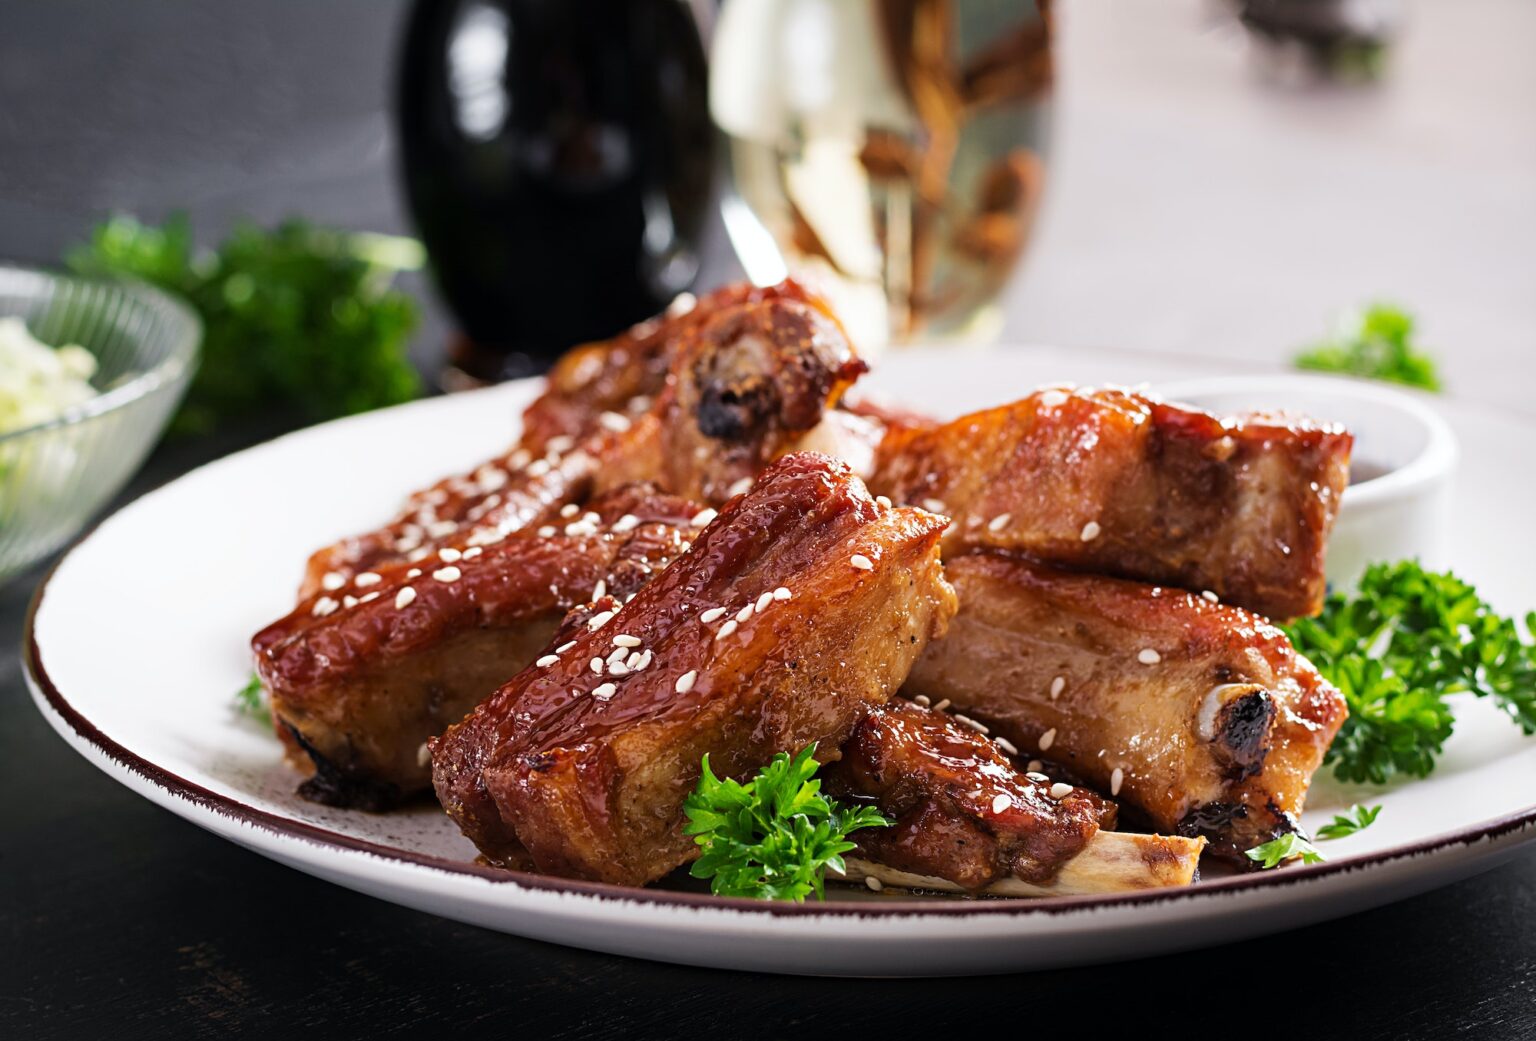 Delicious barbecued spare ribs on plate on dark background. Tasty bbq meat.